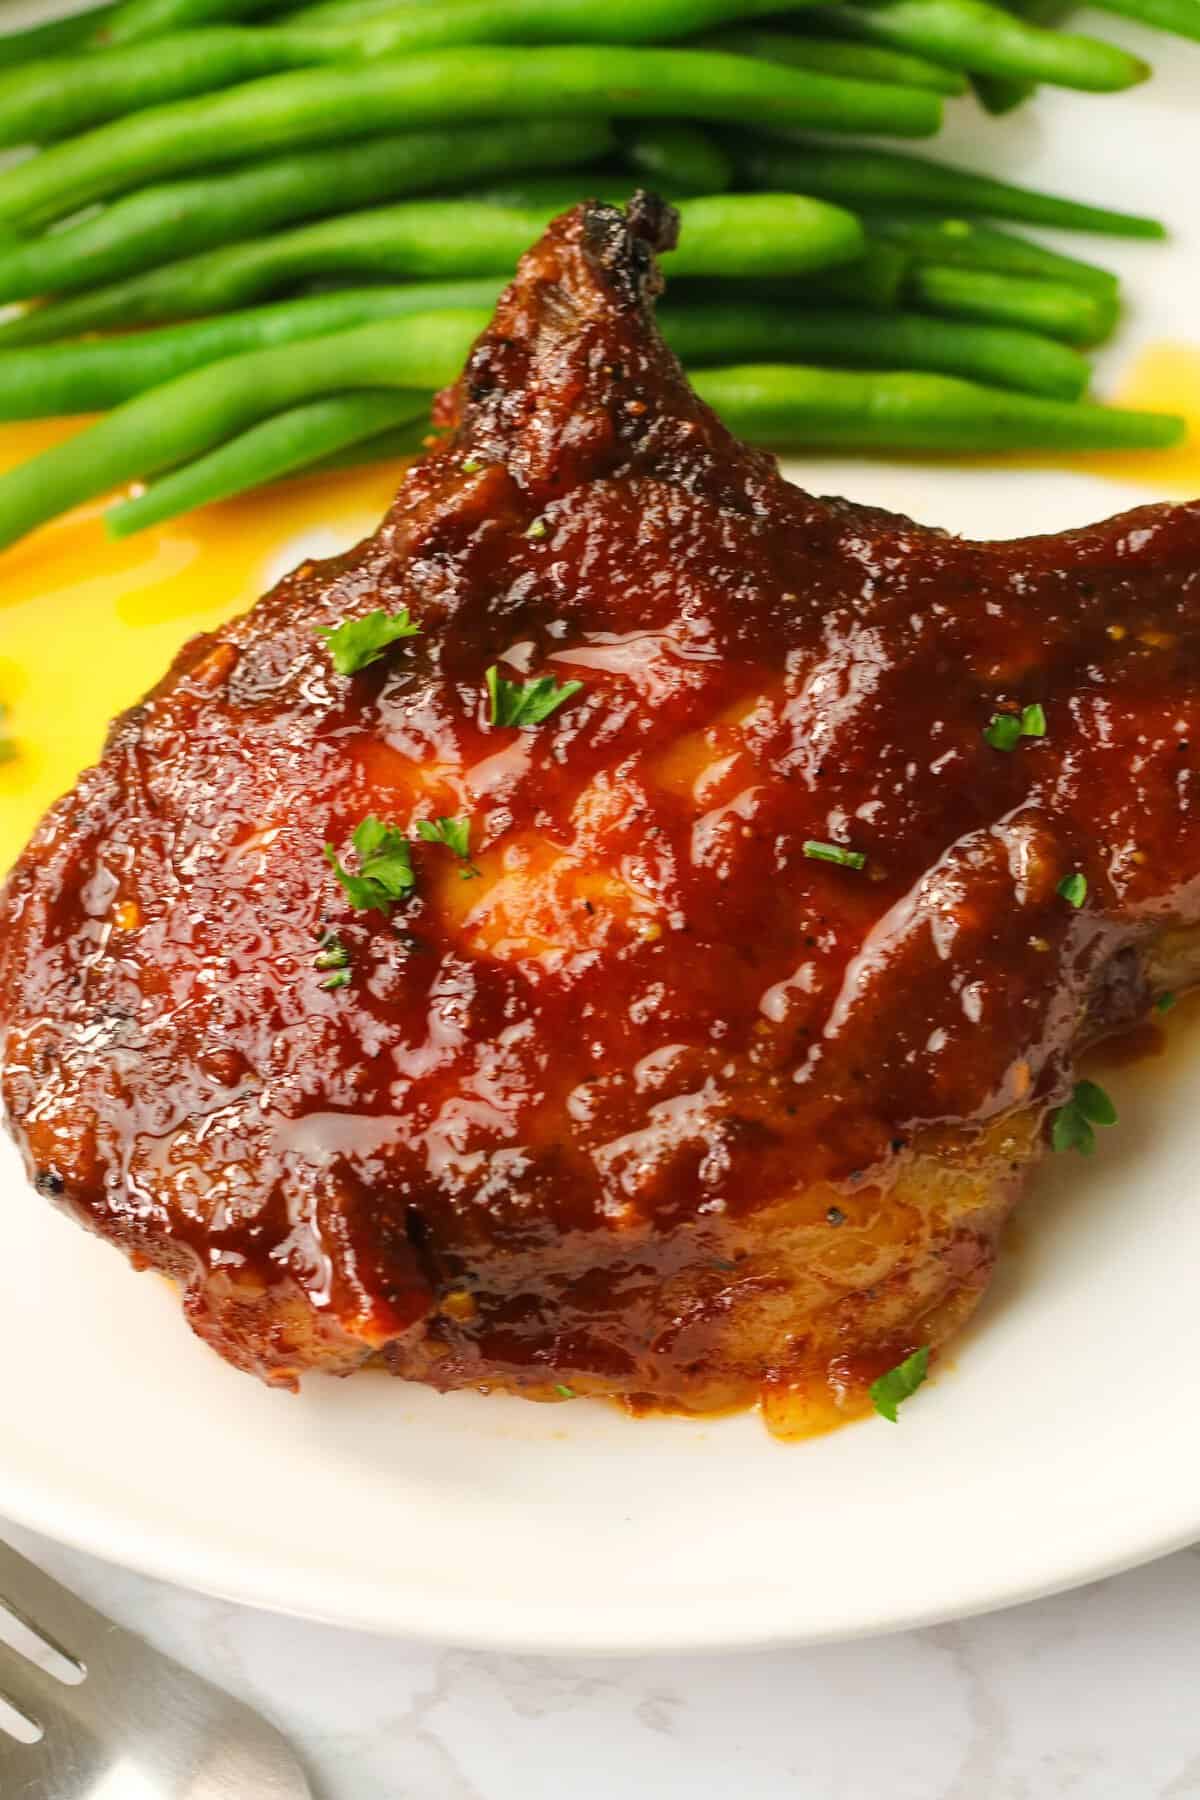 Delectable Oven BBQ Pork Chops with roasted green beans for a wholesome dinner